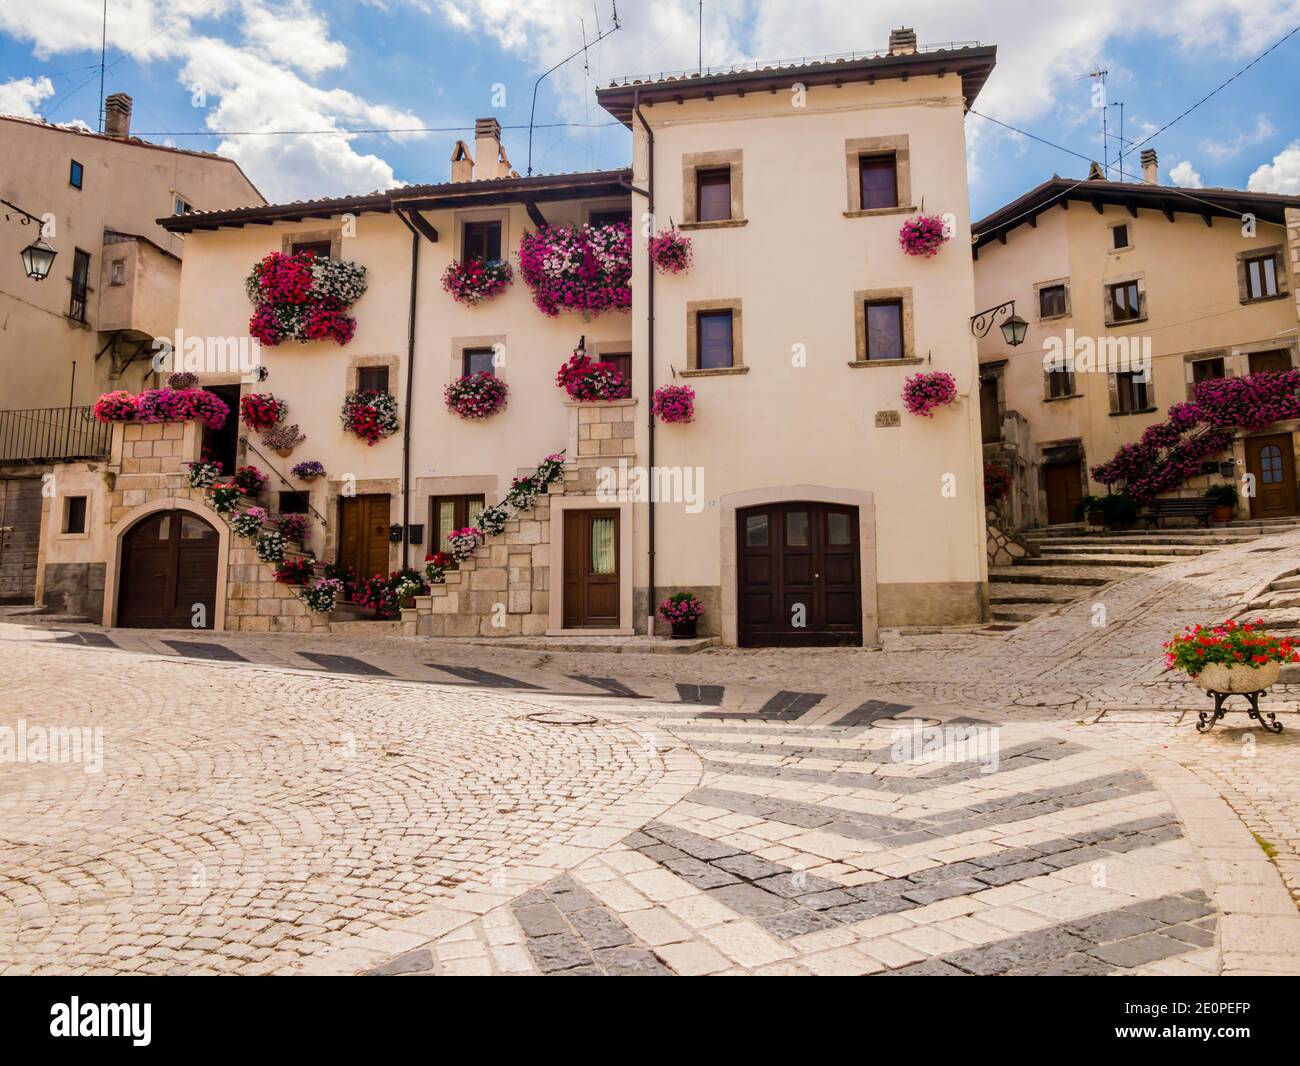 Stunning view of Pescocostanzo, the village of flower with typical architecture of the houses, Abruzzo, central Italy Stock Photo